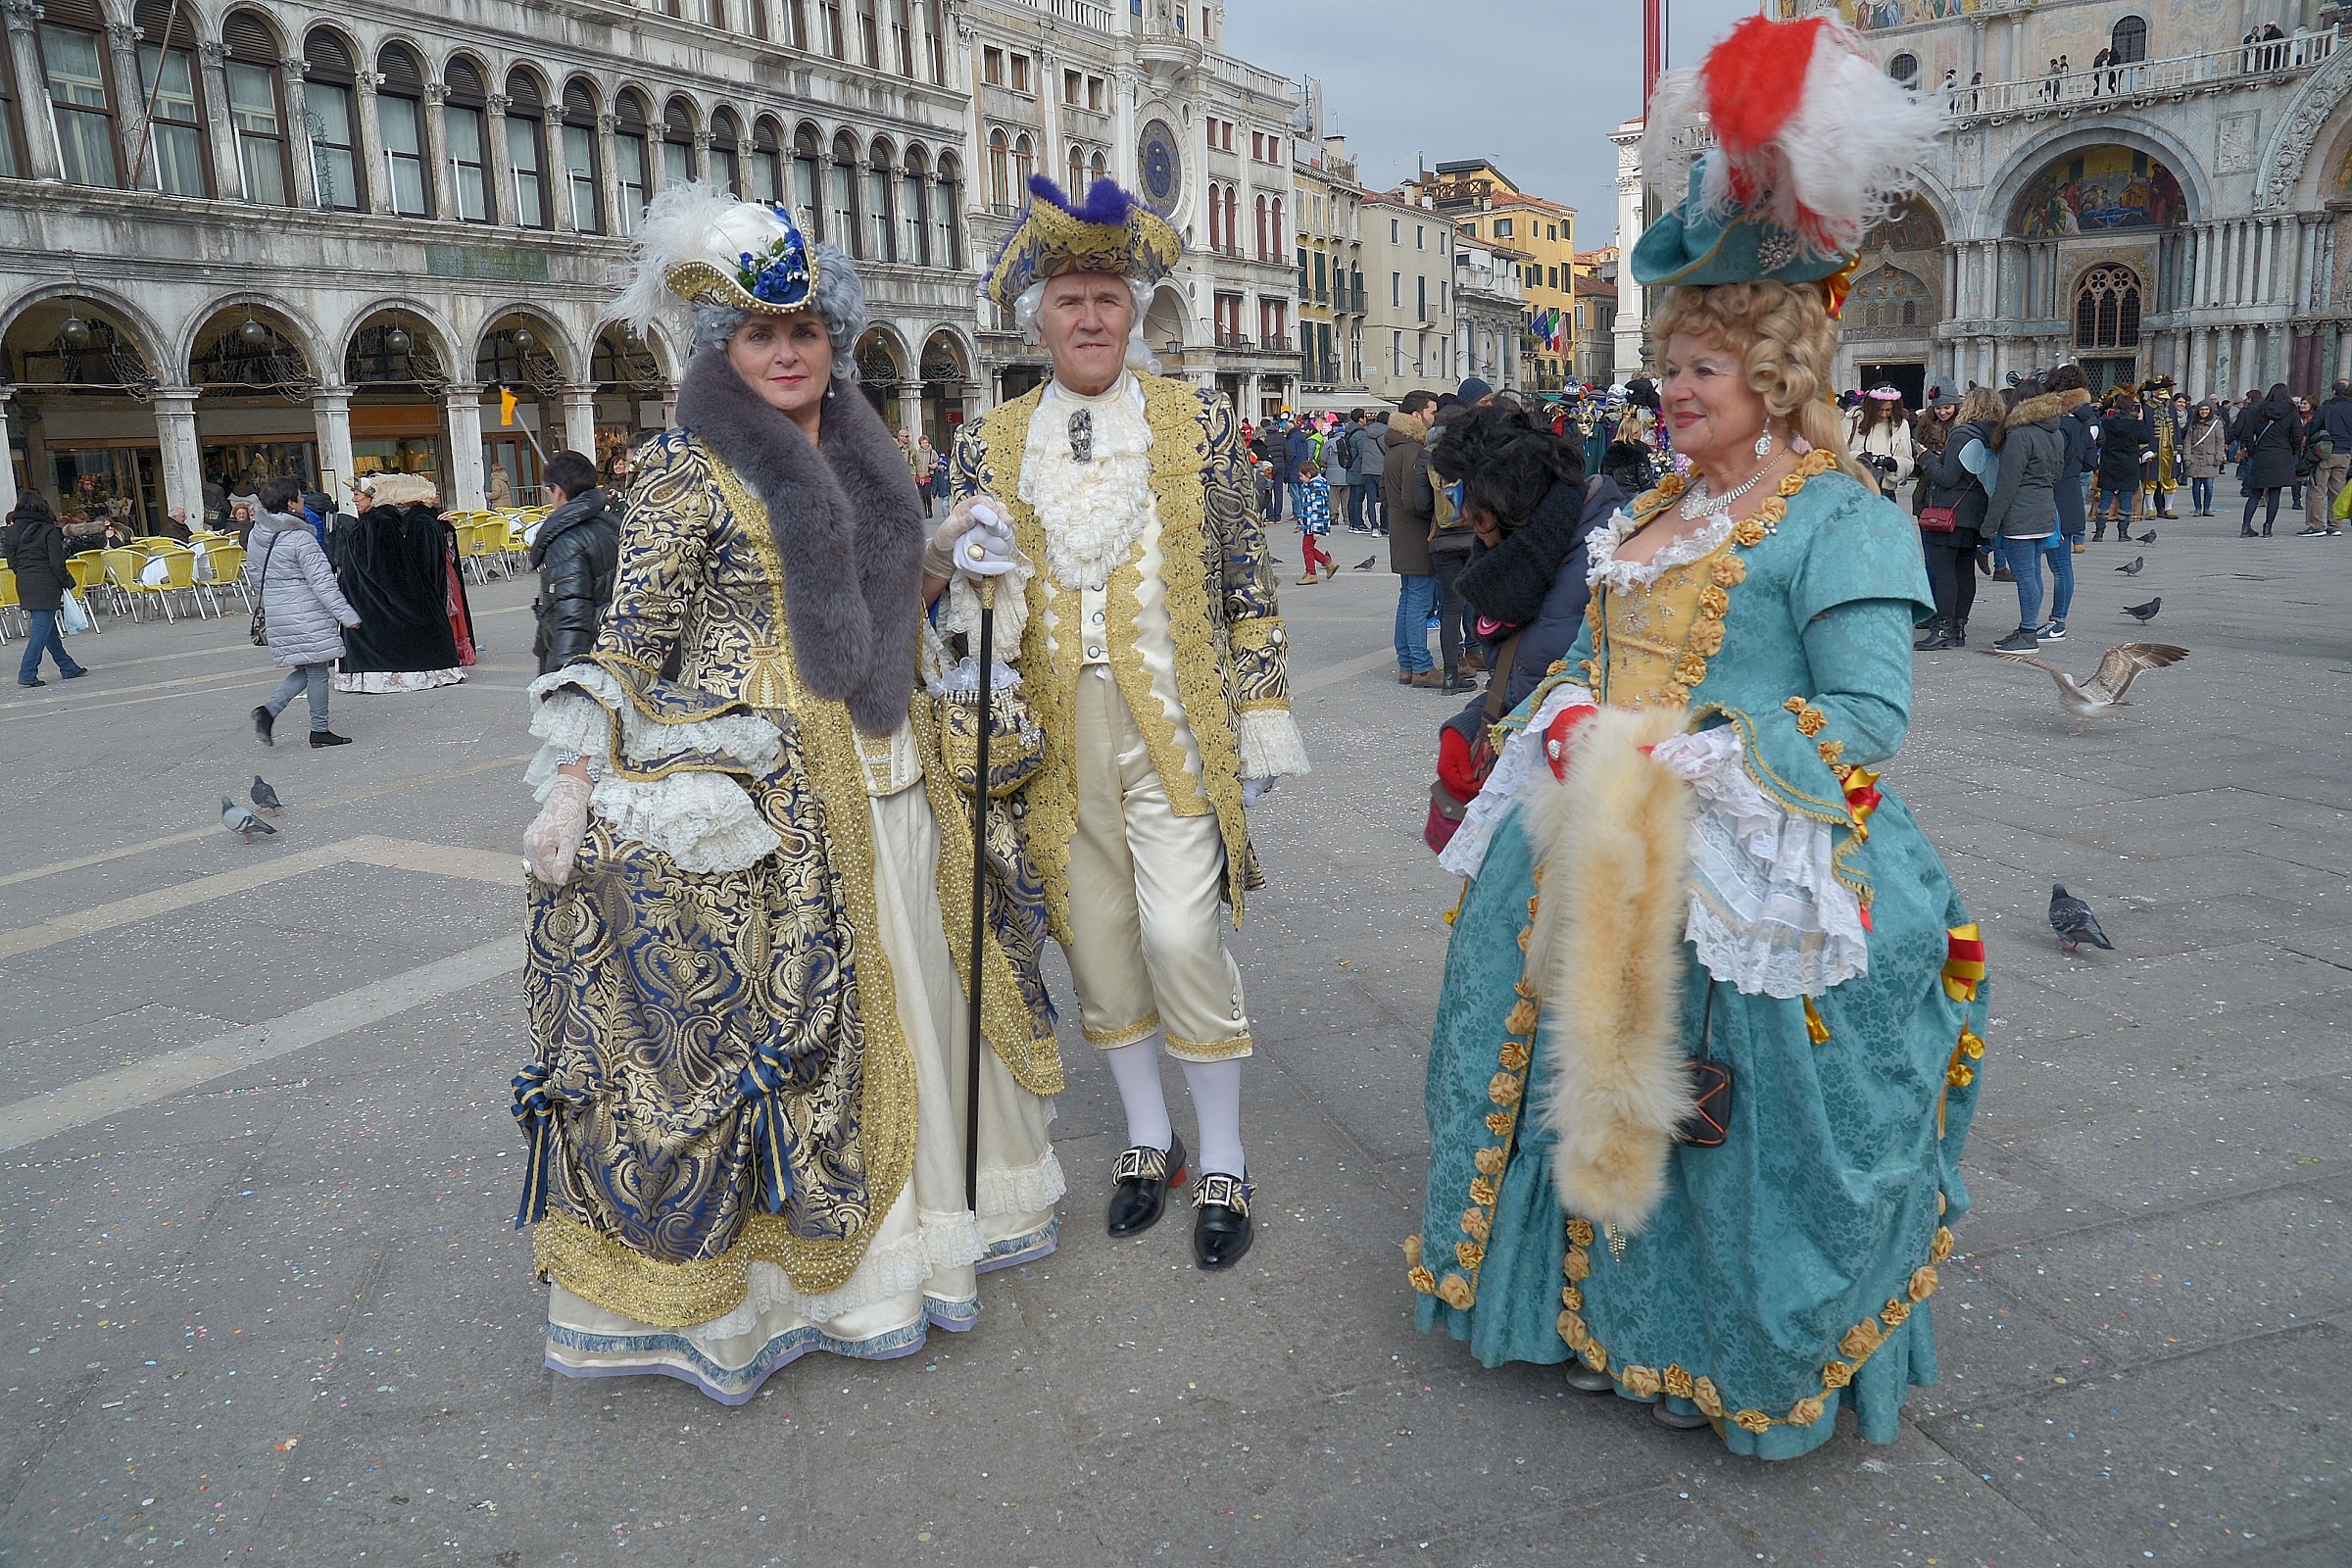 ... In the Piazza San Marco ......